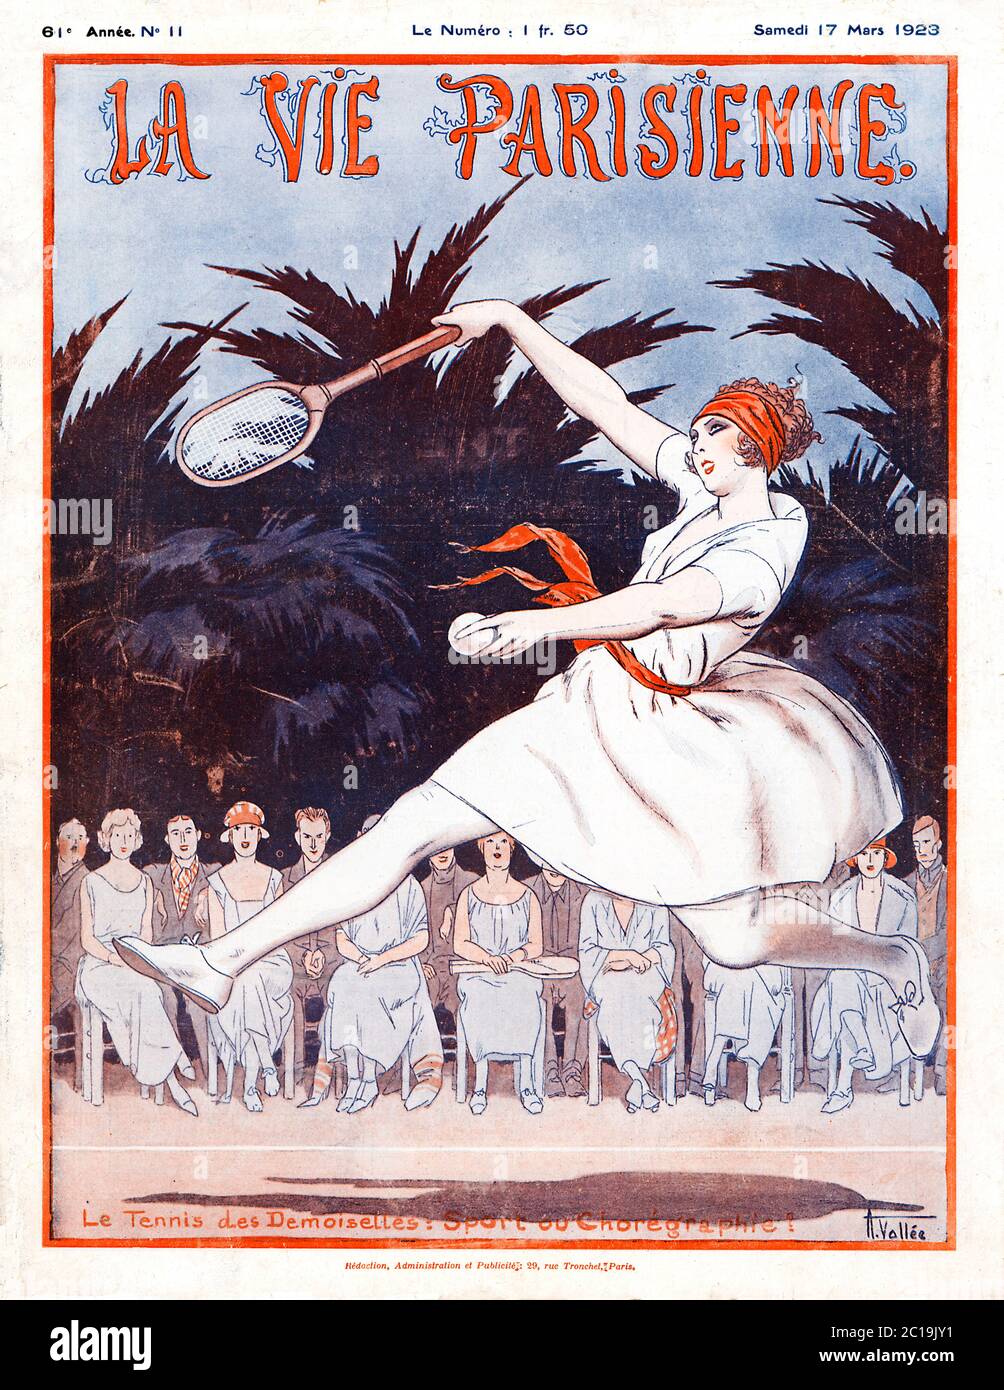 Tennis Des Desmoiselles, Sport ou Choreographie? 1923 French magazine cover extolling the grace and beauty of ladies' tennis Stock Photo